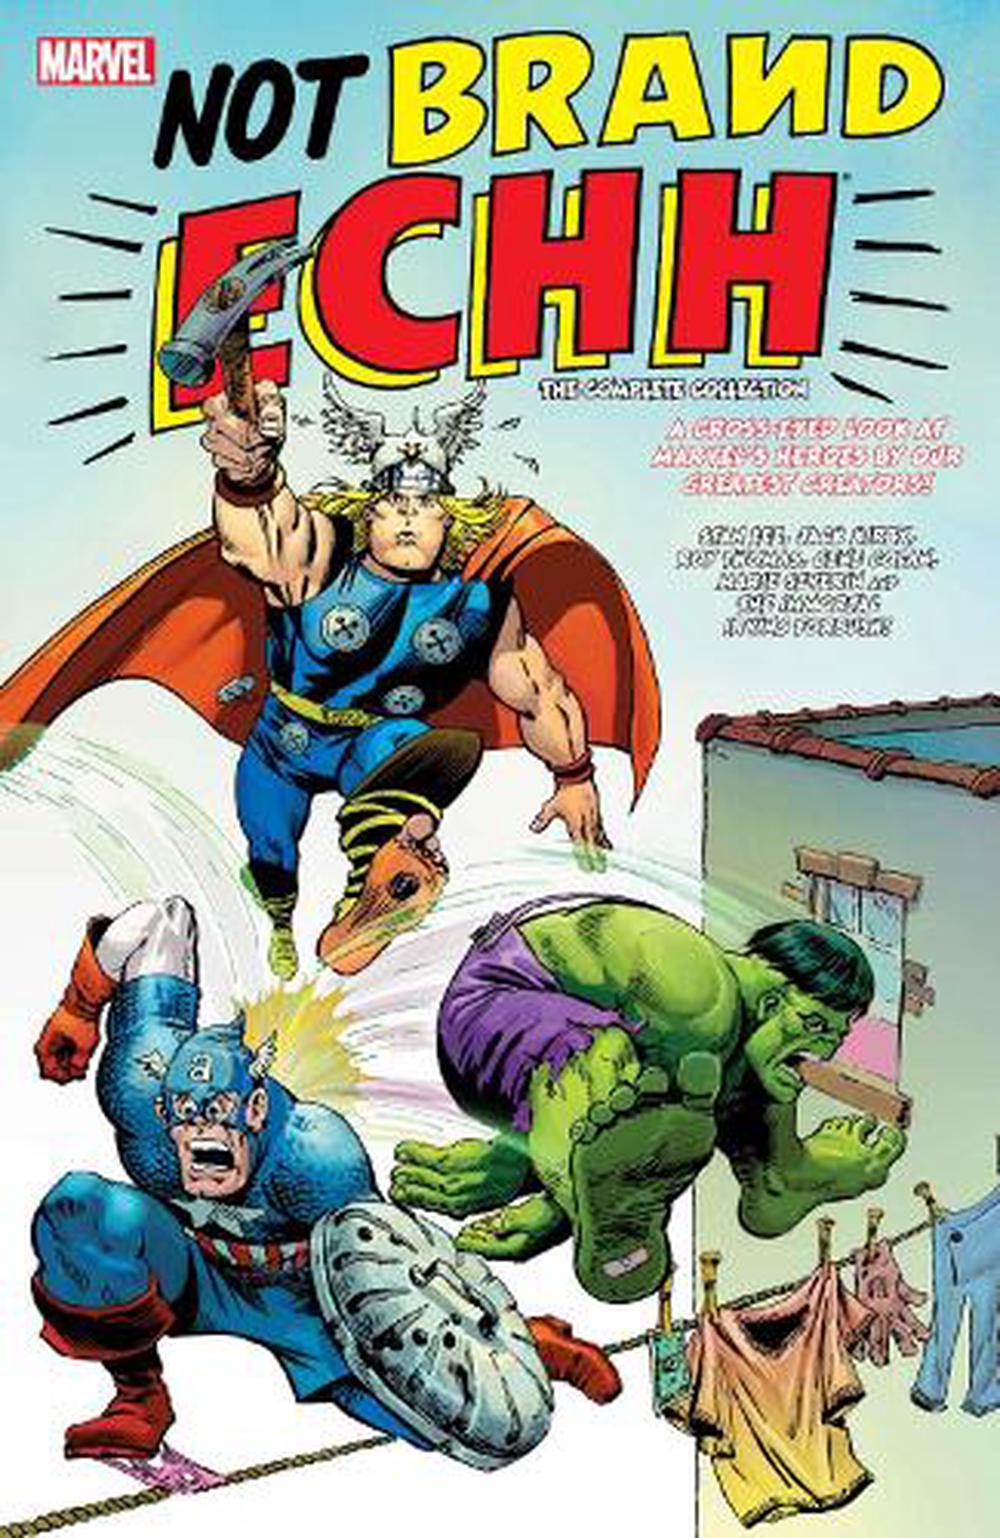 Not Brand Echh the Complete Collection by Marvel Comics